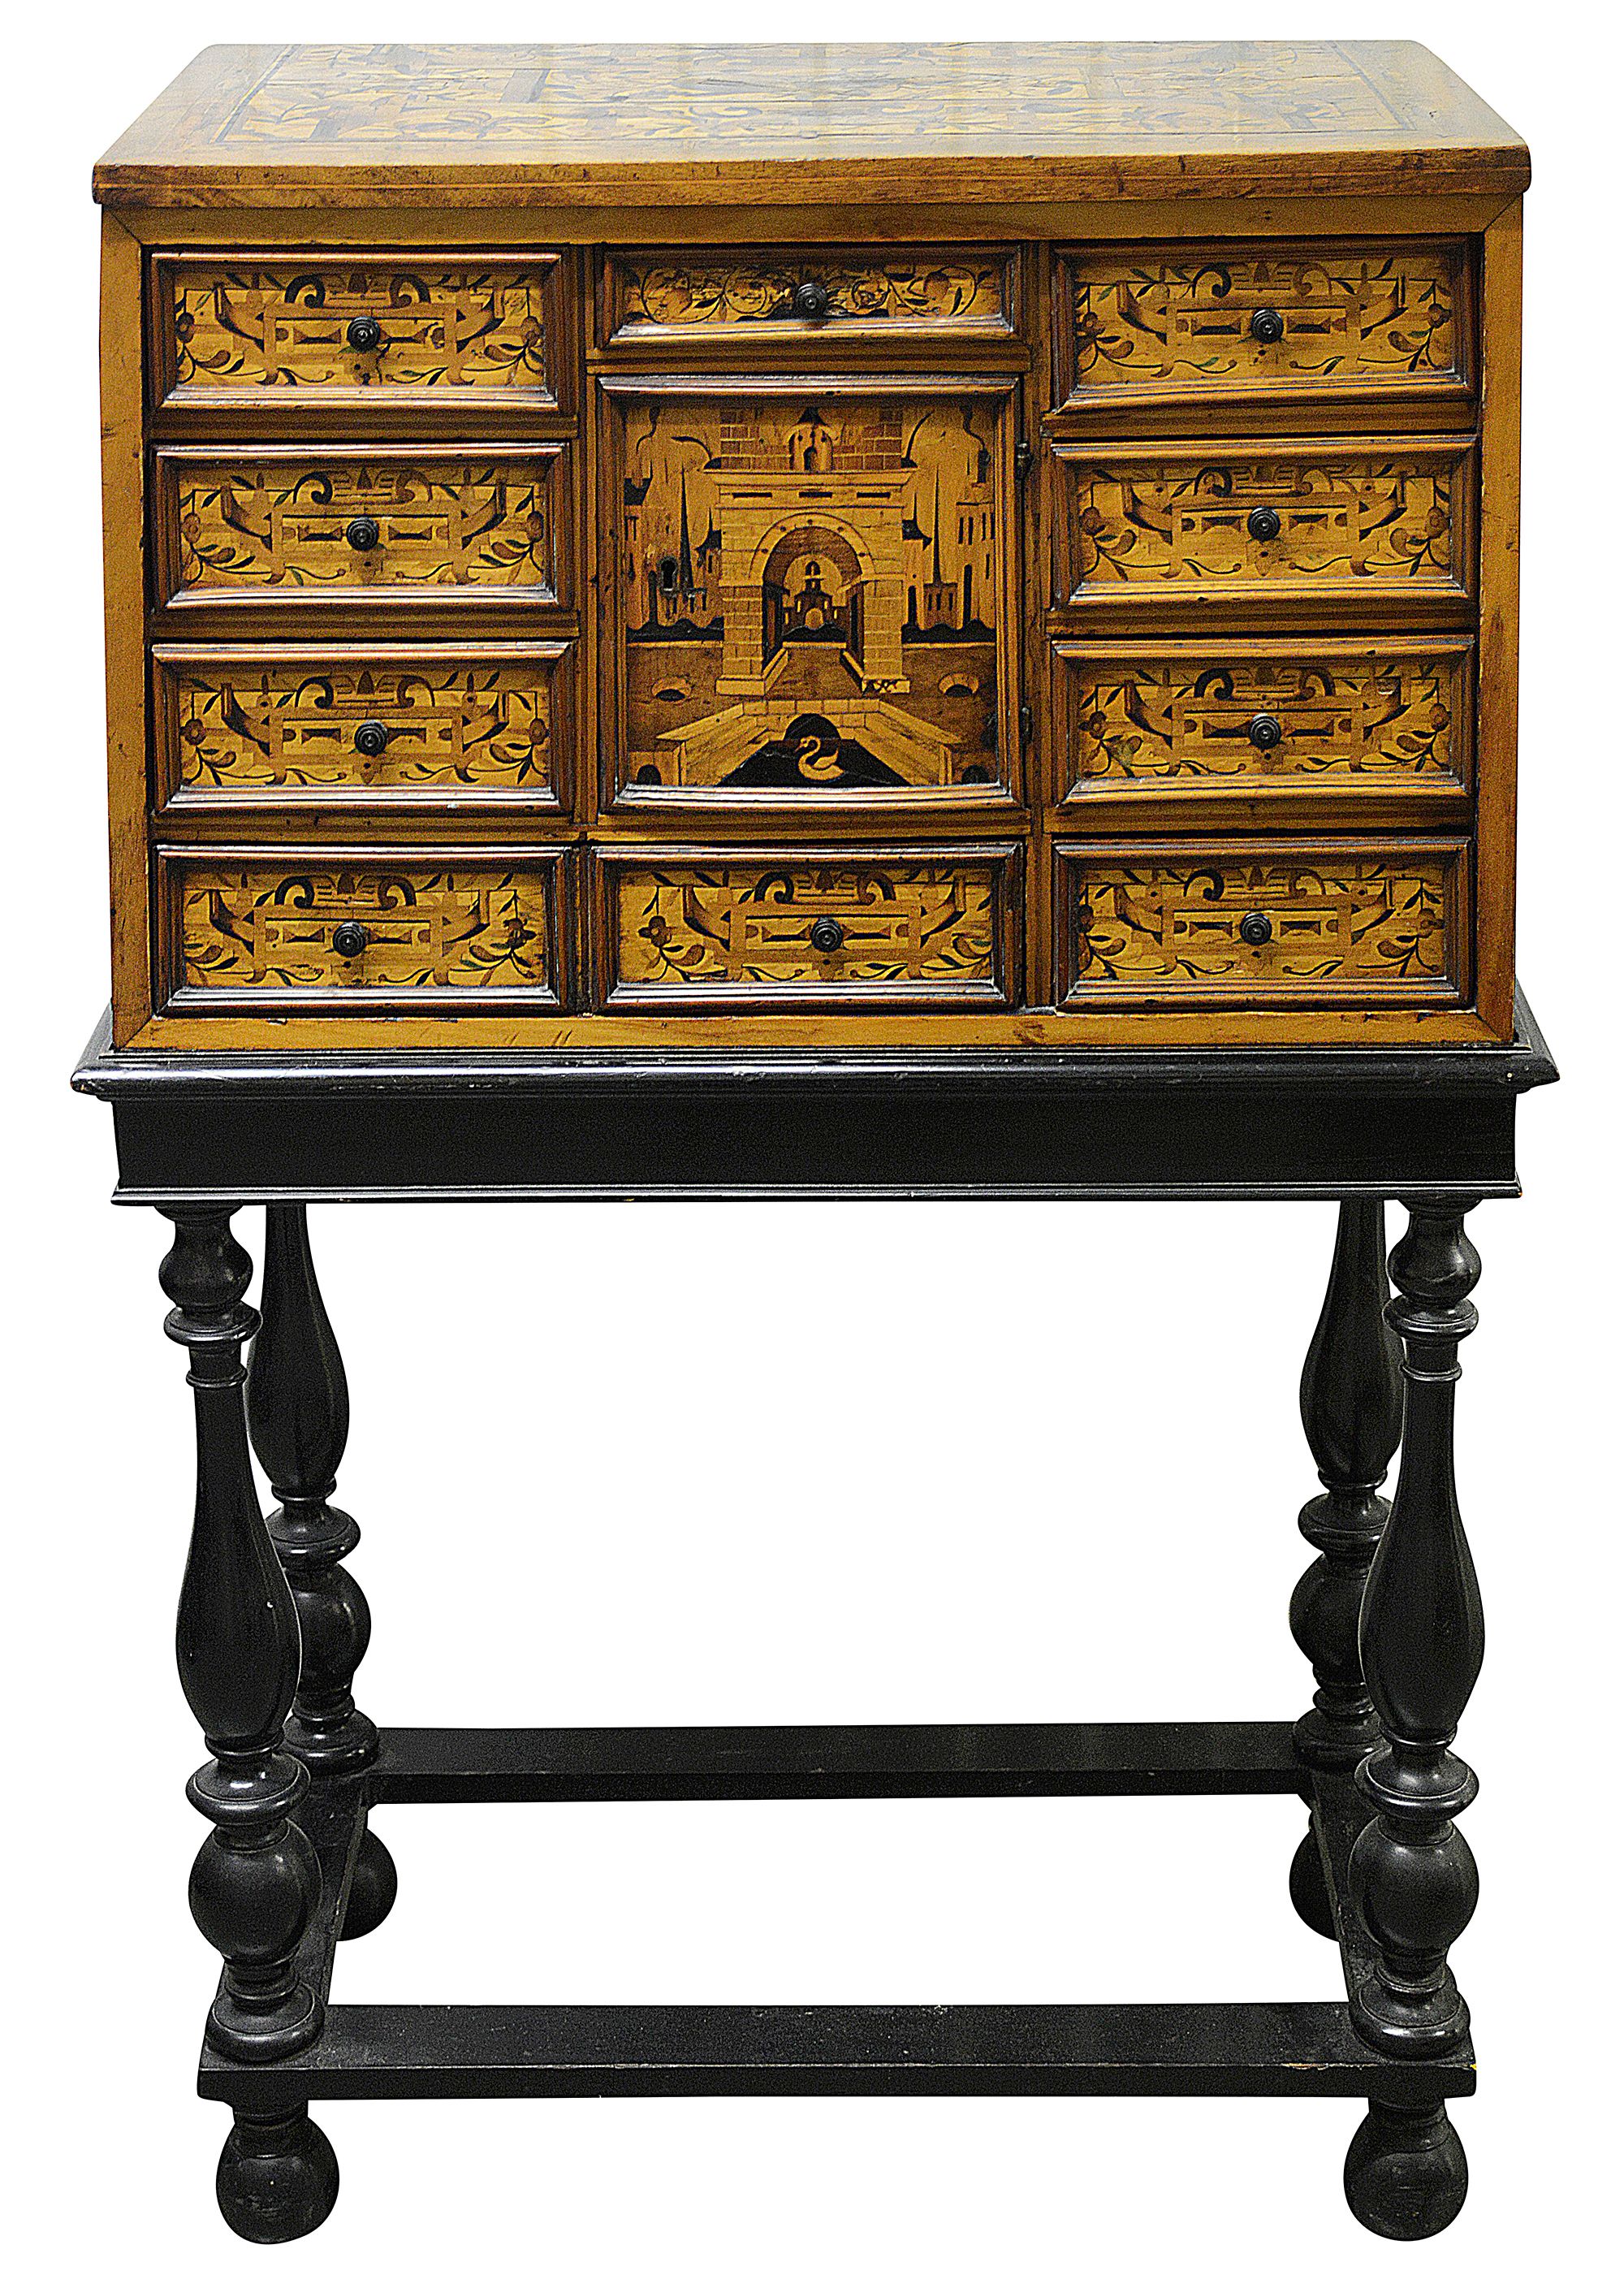 A South German walnut and marquetry cabinet on stand